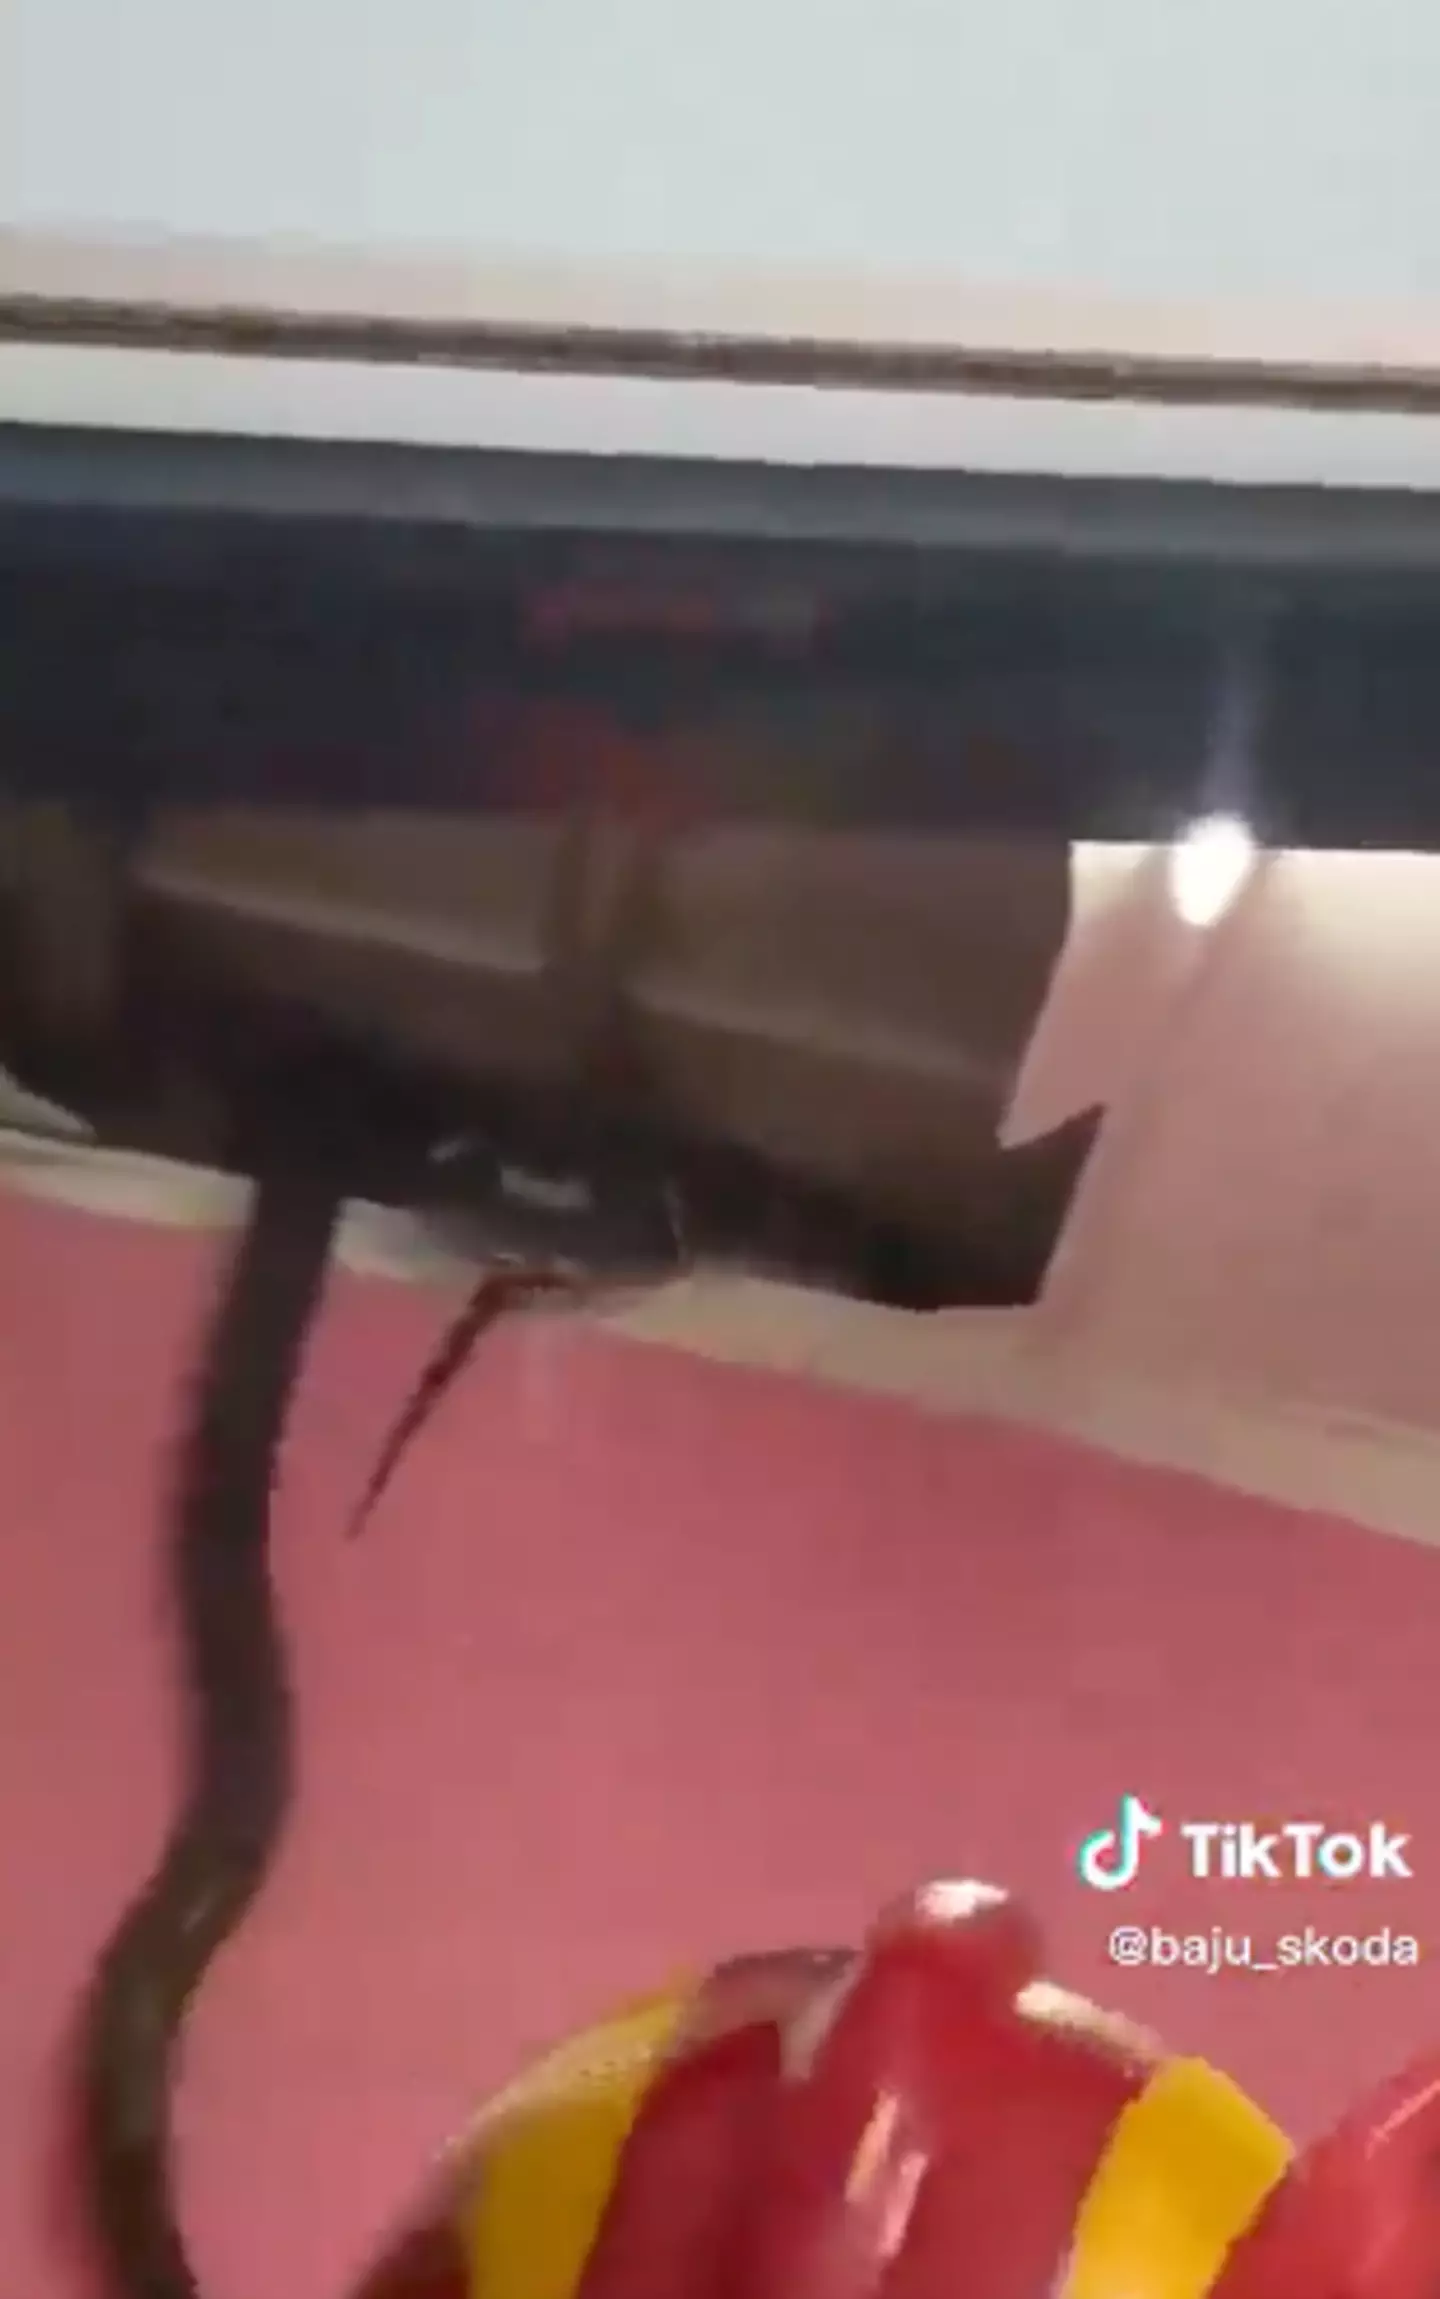 The viral snake video shared on TikTok is triggering viewers' Ophidiophobia.